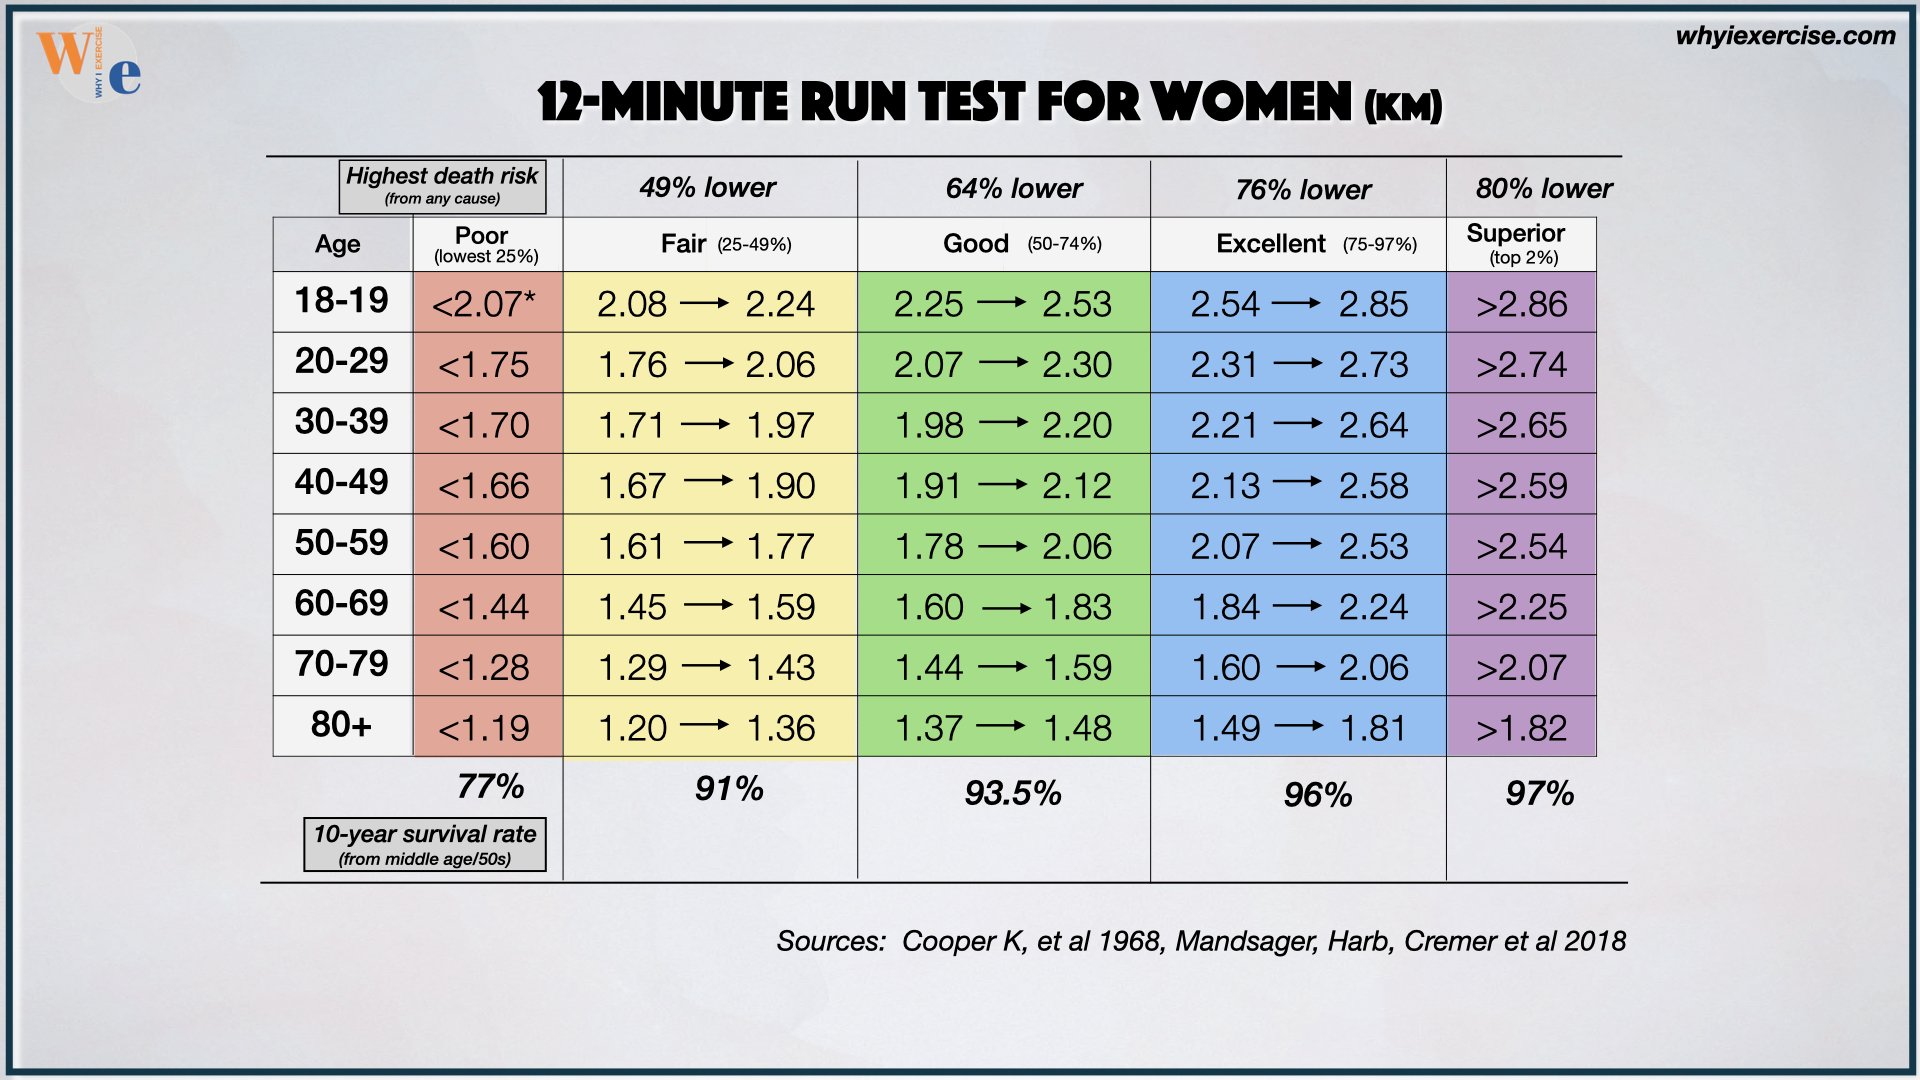 Cooper 12-minute run women's age group charts based on VO2 max data